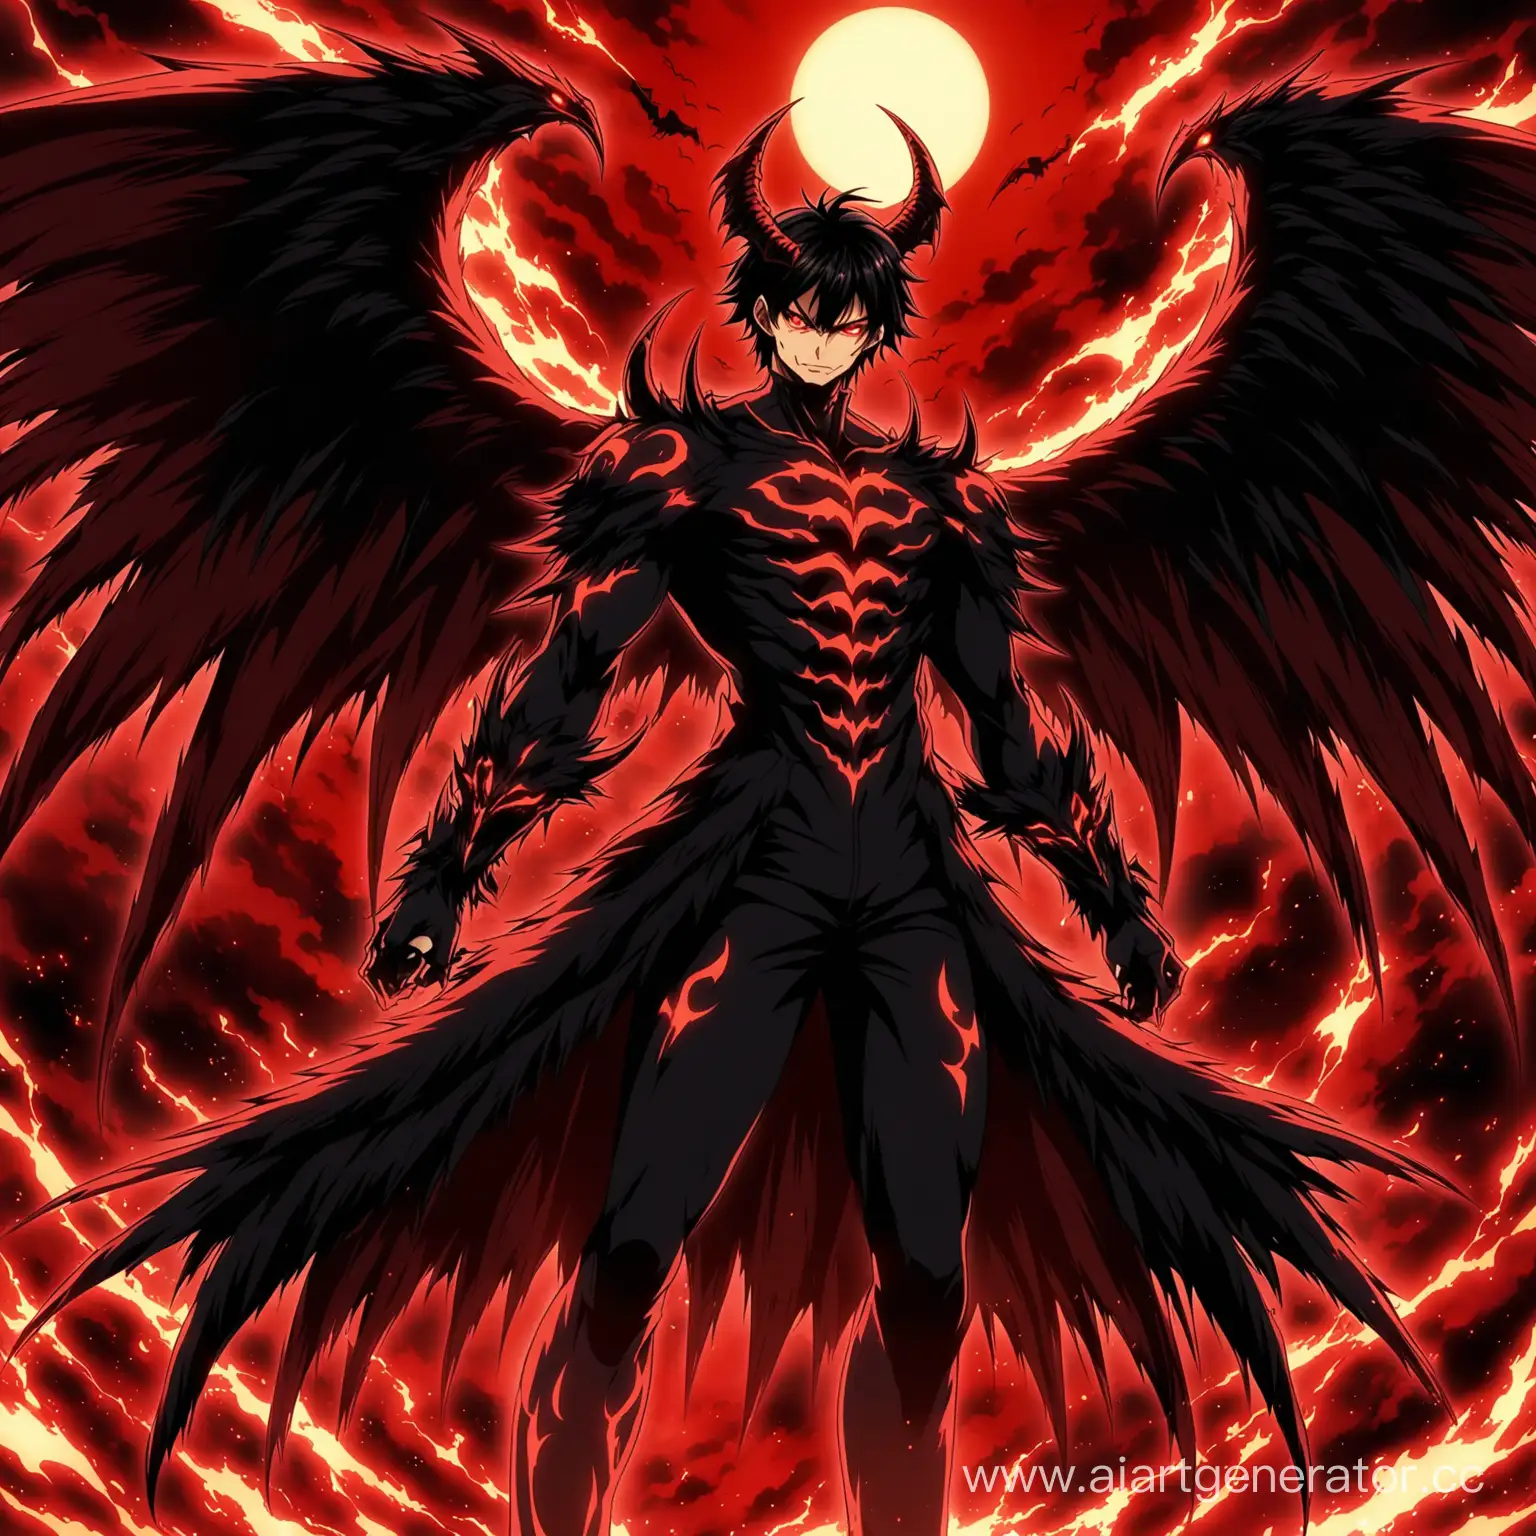 Ethereal-Anime-Character-with-Demonic-Wings